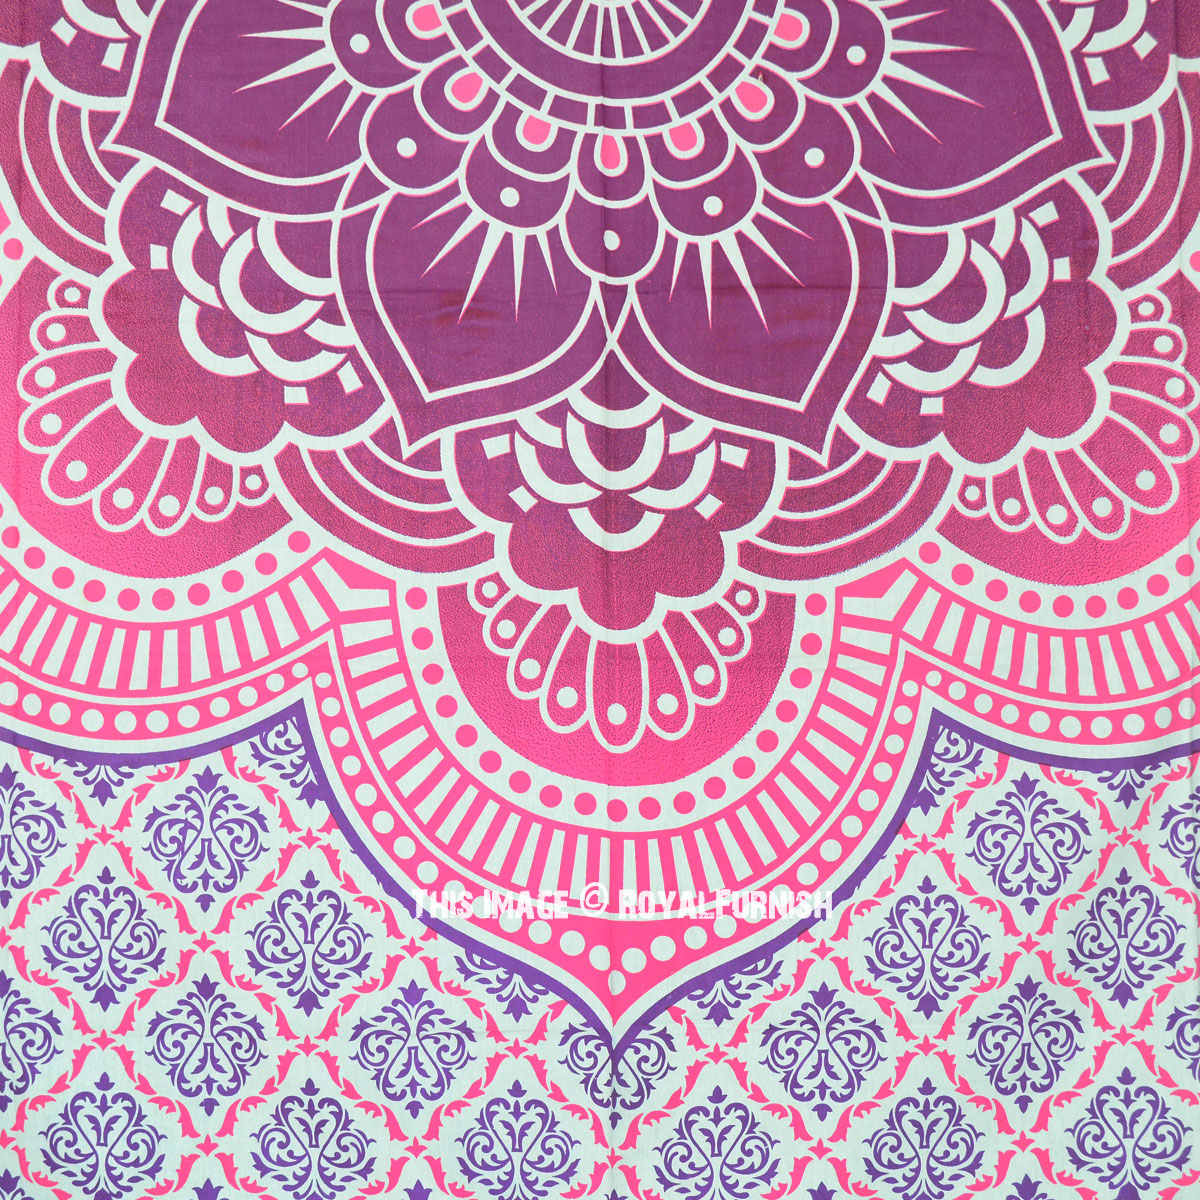 39+ Amazing Pink Wall Tapestry